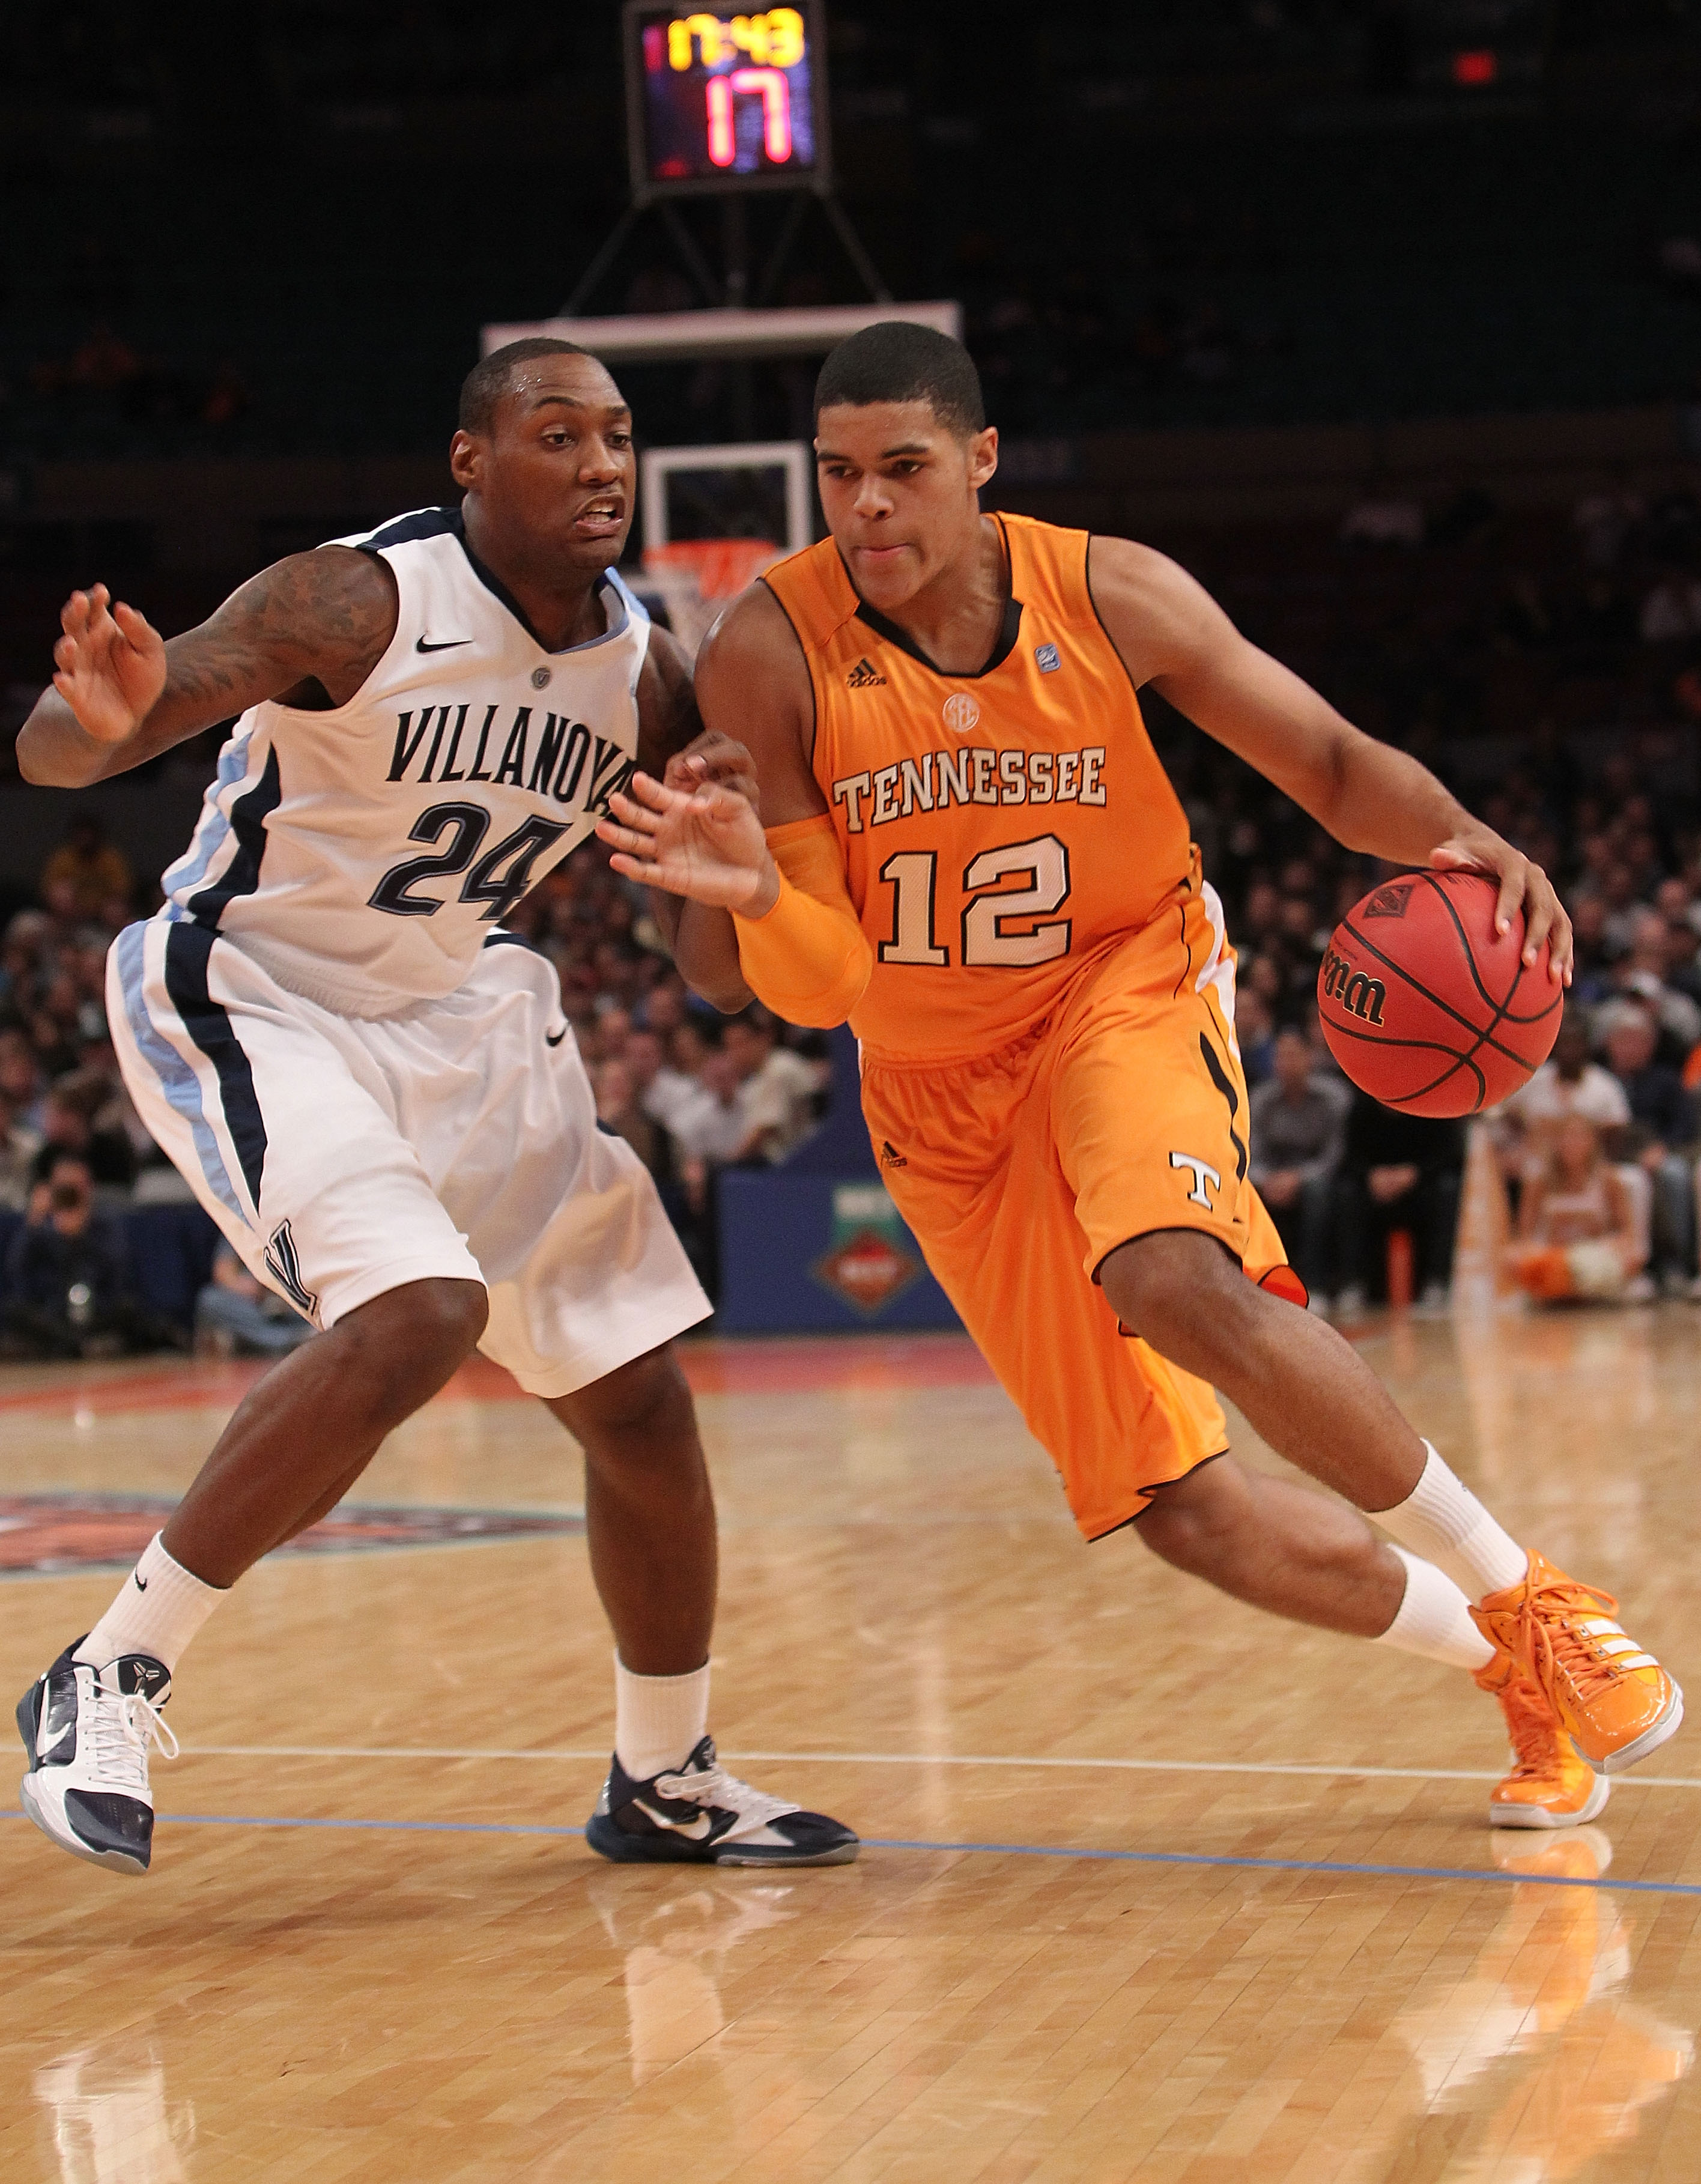 NEW YORK - NOVEMBER 26:  Tobias Harris #12 of the Tennessee Volunteers drives to the basket against against Corey Stokes #24 of the Villanova Wildcats  during the Championship game at Madison Square Garden on November 26, 2010 in New York City.  (Photo by